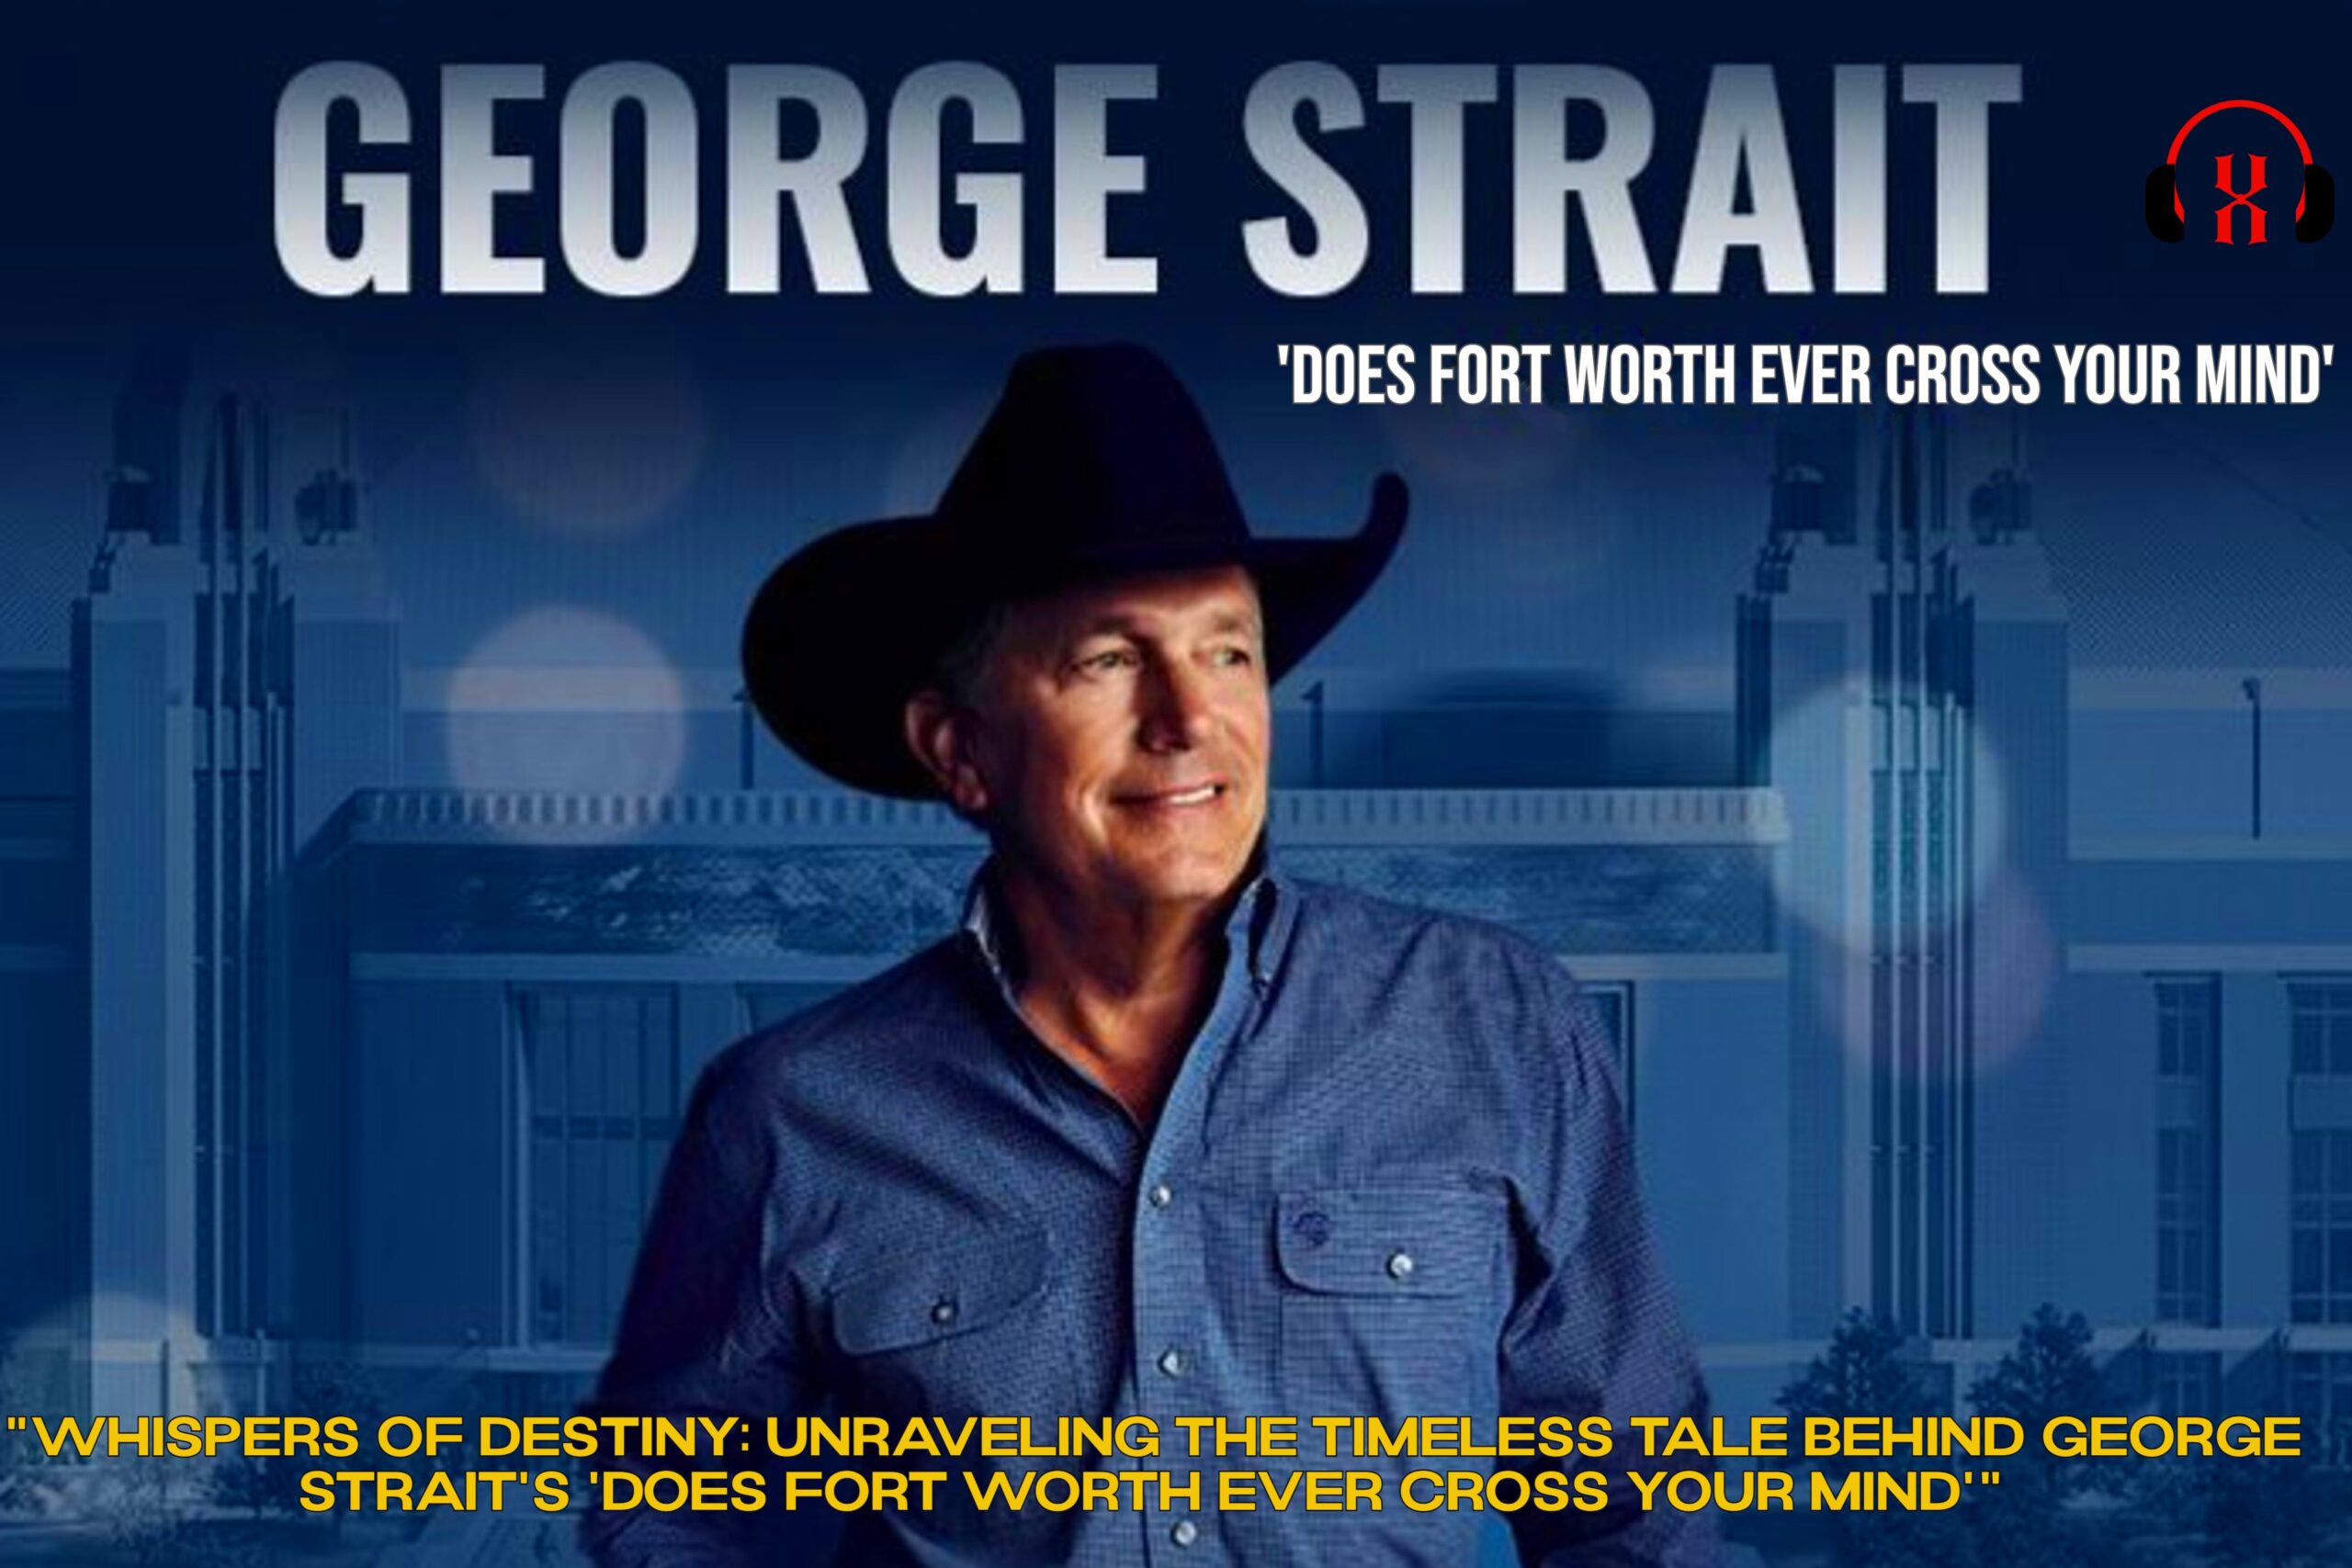 “Whispers of Destiny: Unraveling the Timeless Tale Behind George Strait’s ‘Does Fort Worth Ever Cross Your Mind'”